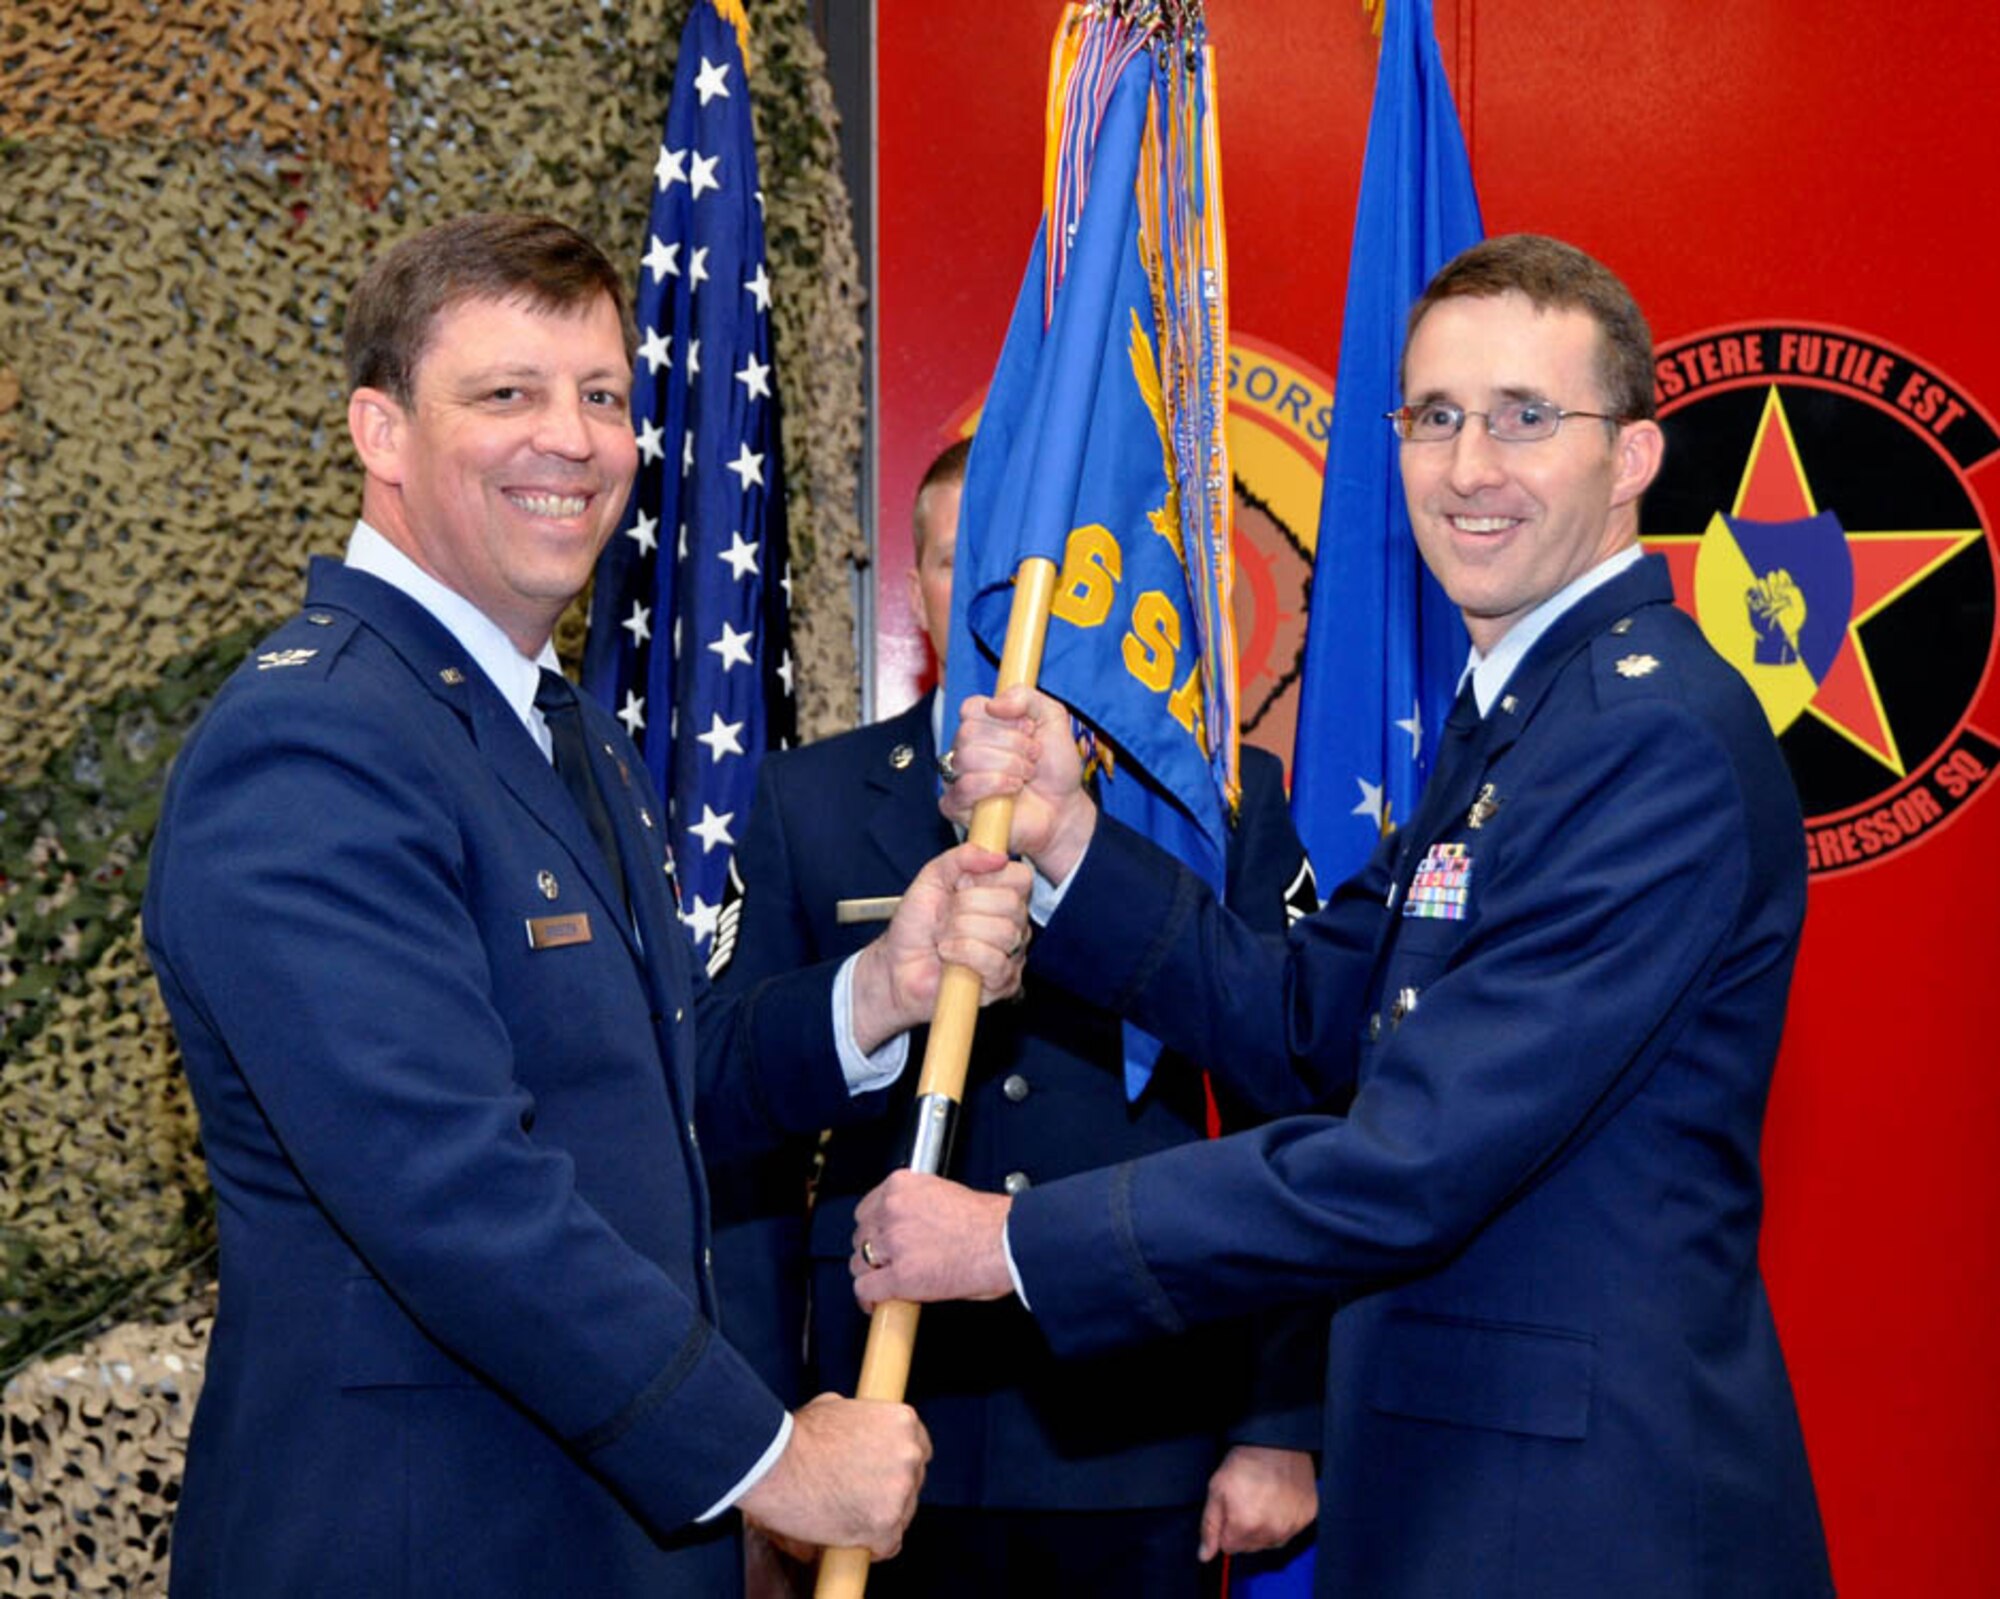 SCHRIEVER AIR FORCE BASE, Colo. -- (Right) Lt. Col. Daniel Bourque, 26th Space Aggressor Squadron, receives the guideon from Col. John Breeden, 926th Group commander, during his assumption of command ceremony at the Space Aggressor Warehouse on Nov. 3. (U.S. Air Force photo/Dan Santistevan)